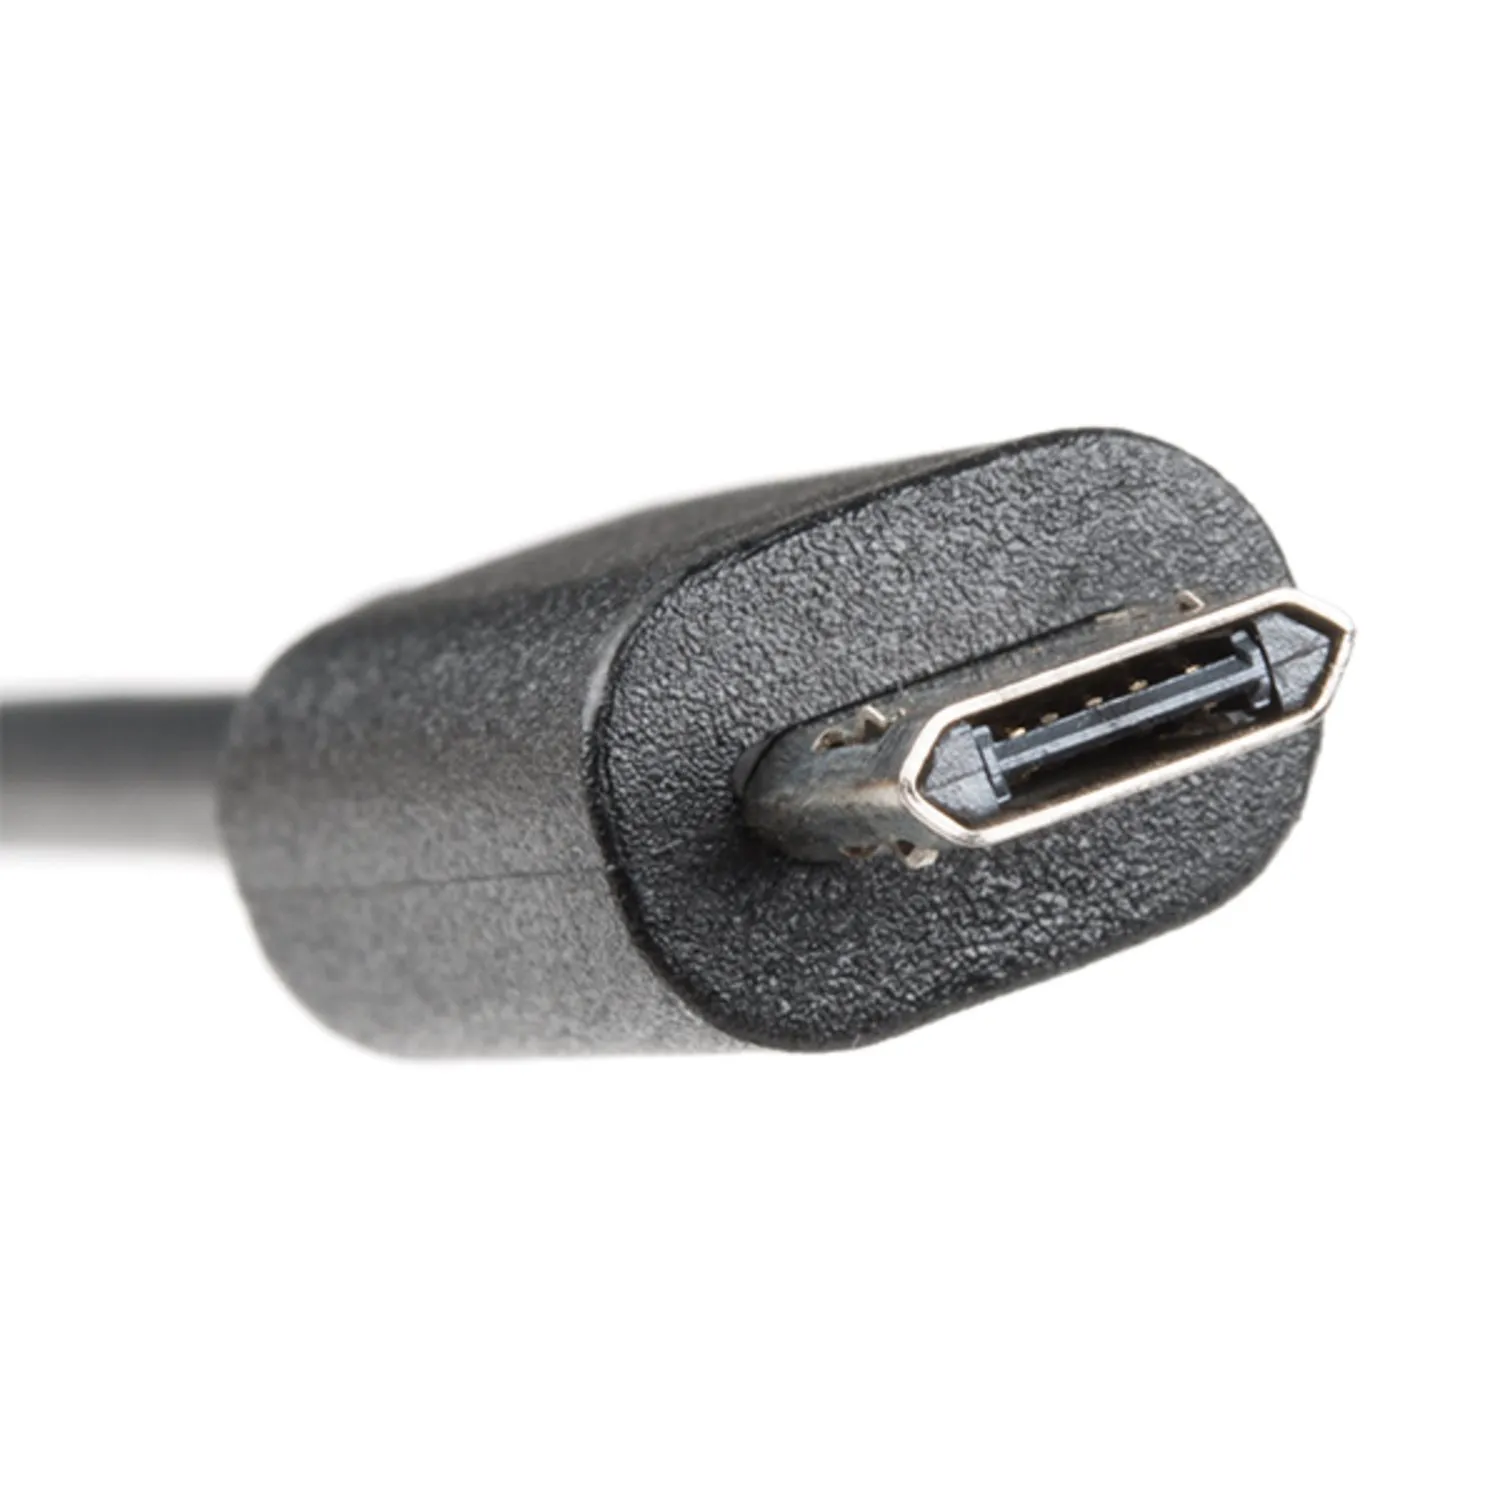 Photo of Reversible USB A to Reversible Micro-B Cable - 0.3m